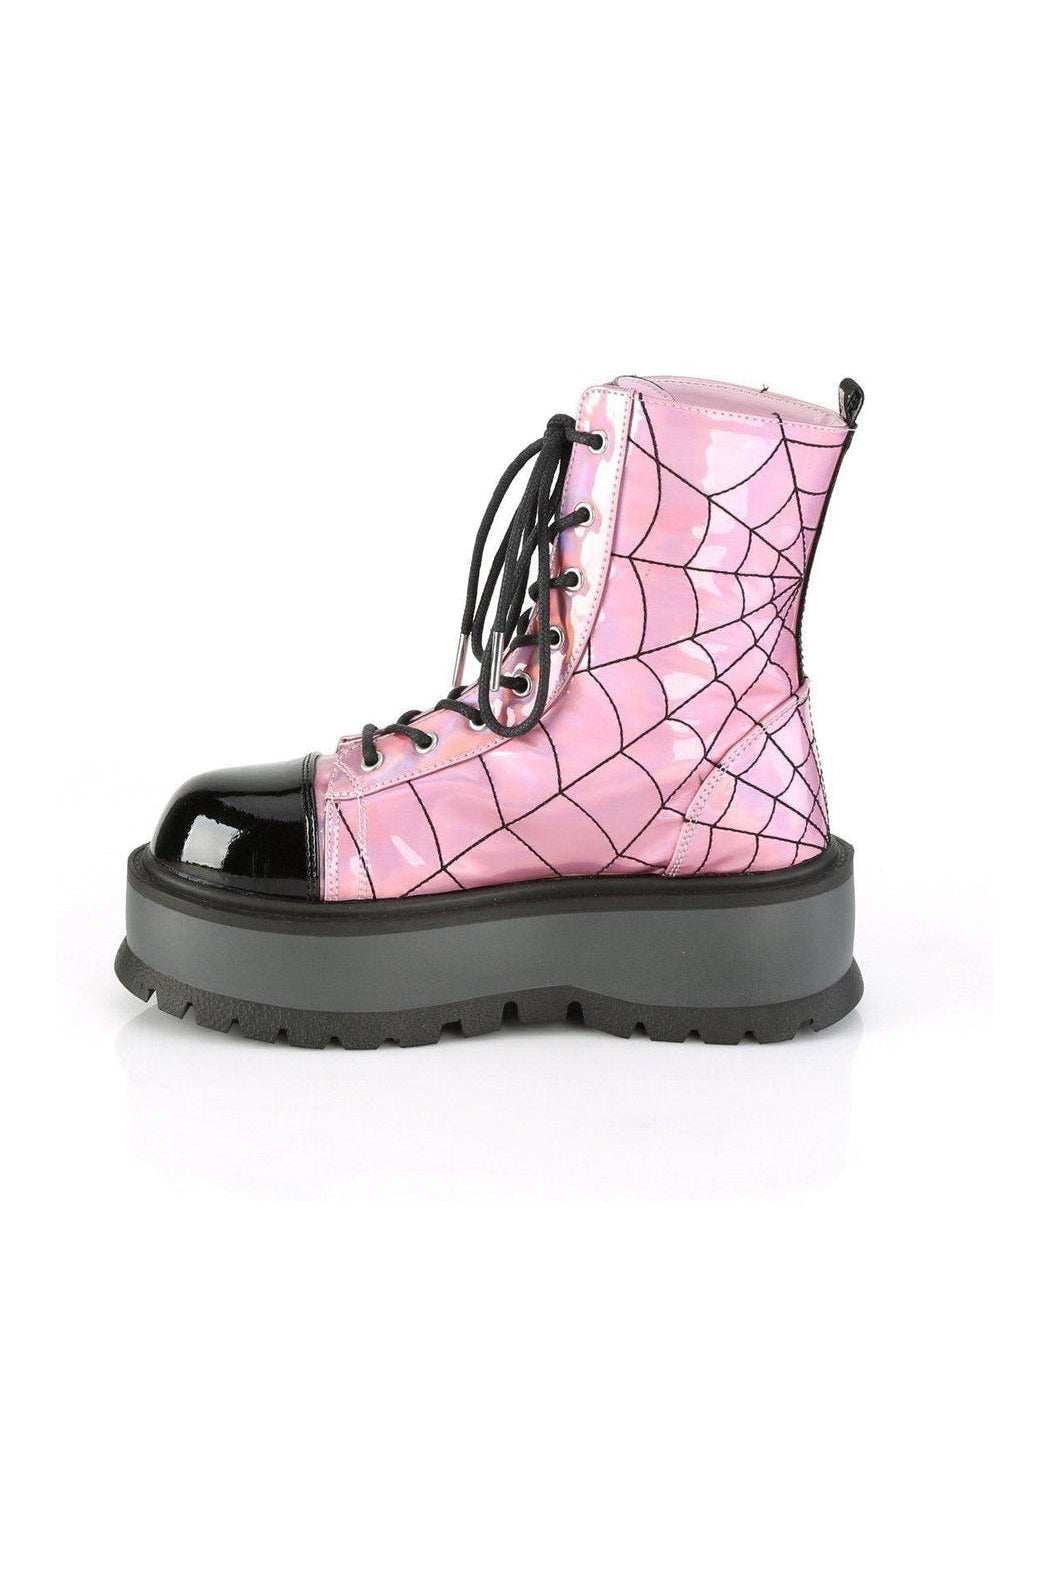 SLACKER-88 Ankle Boot | Hologram Patent-Ankle Boots-Demonia-SEXYSHOES.COM